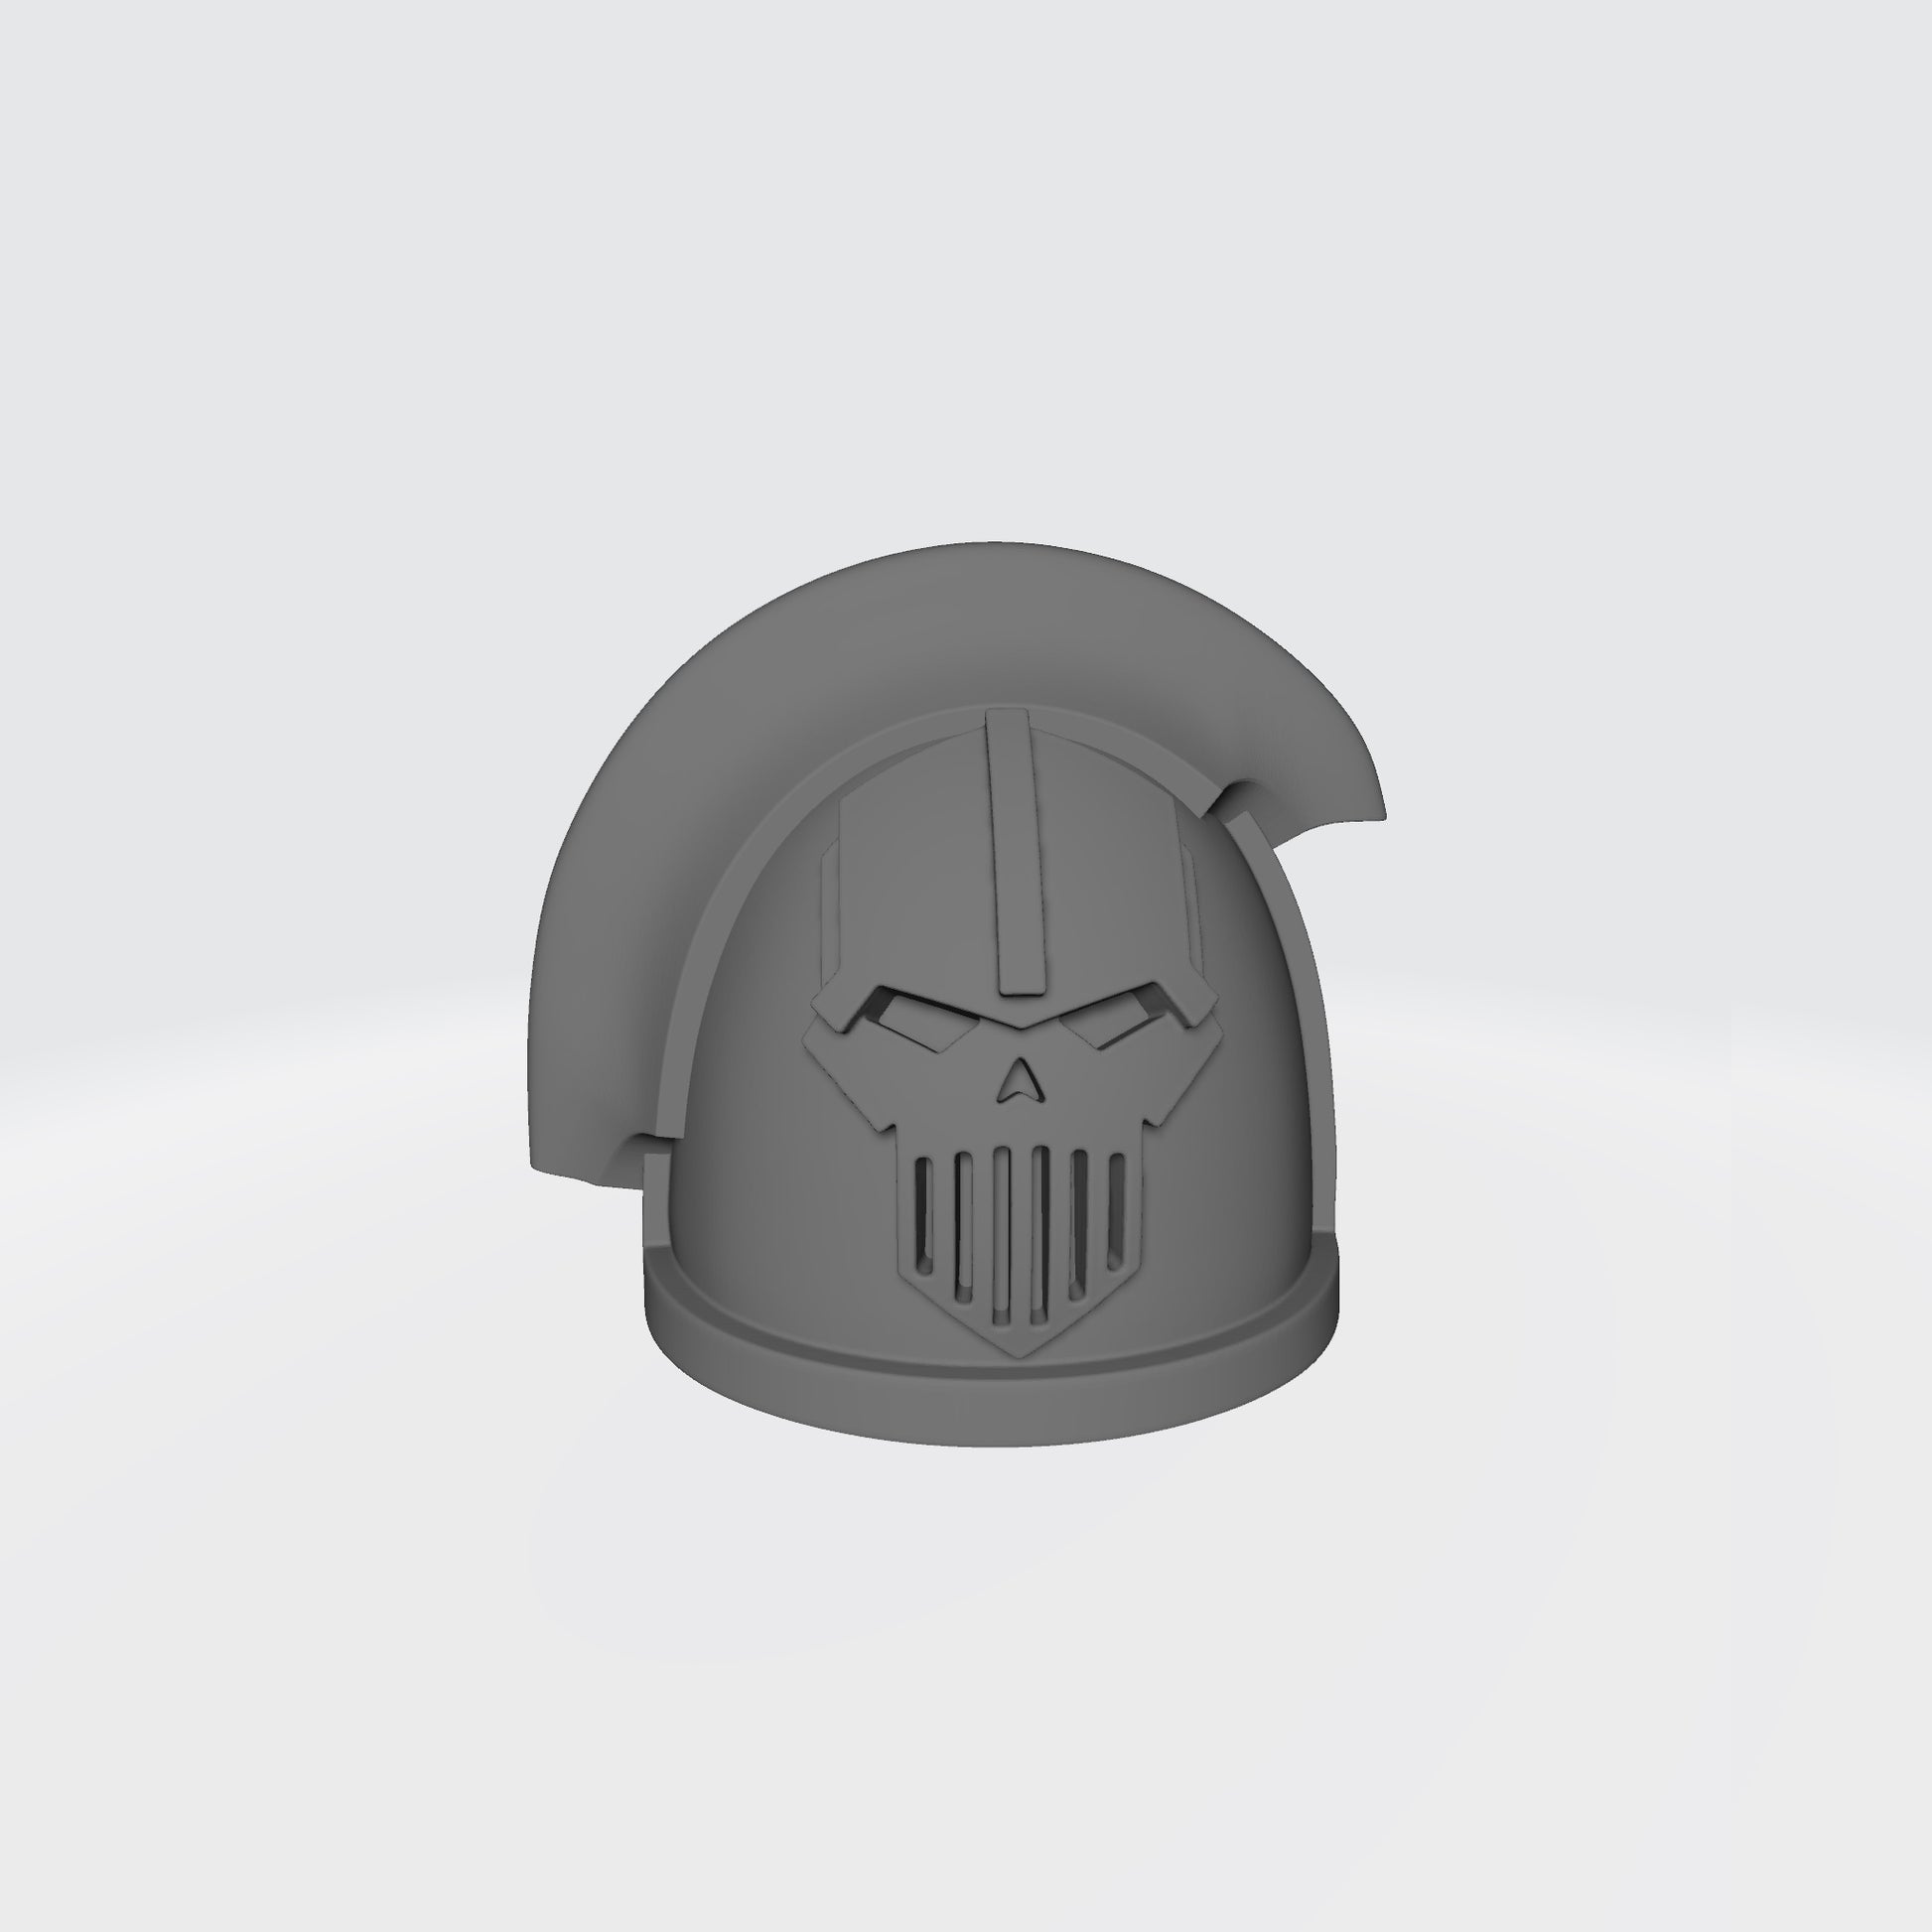 Custom Iron Warriors MKIII Shoulder Pad with 3 Quarter Ridge for the Left Shoulder Compatible with McFarlane Toys 1:12th Scale Space Marine Action Figures